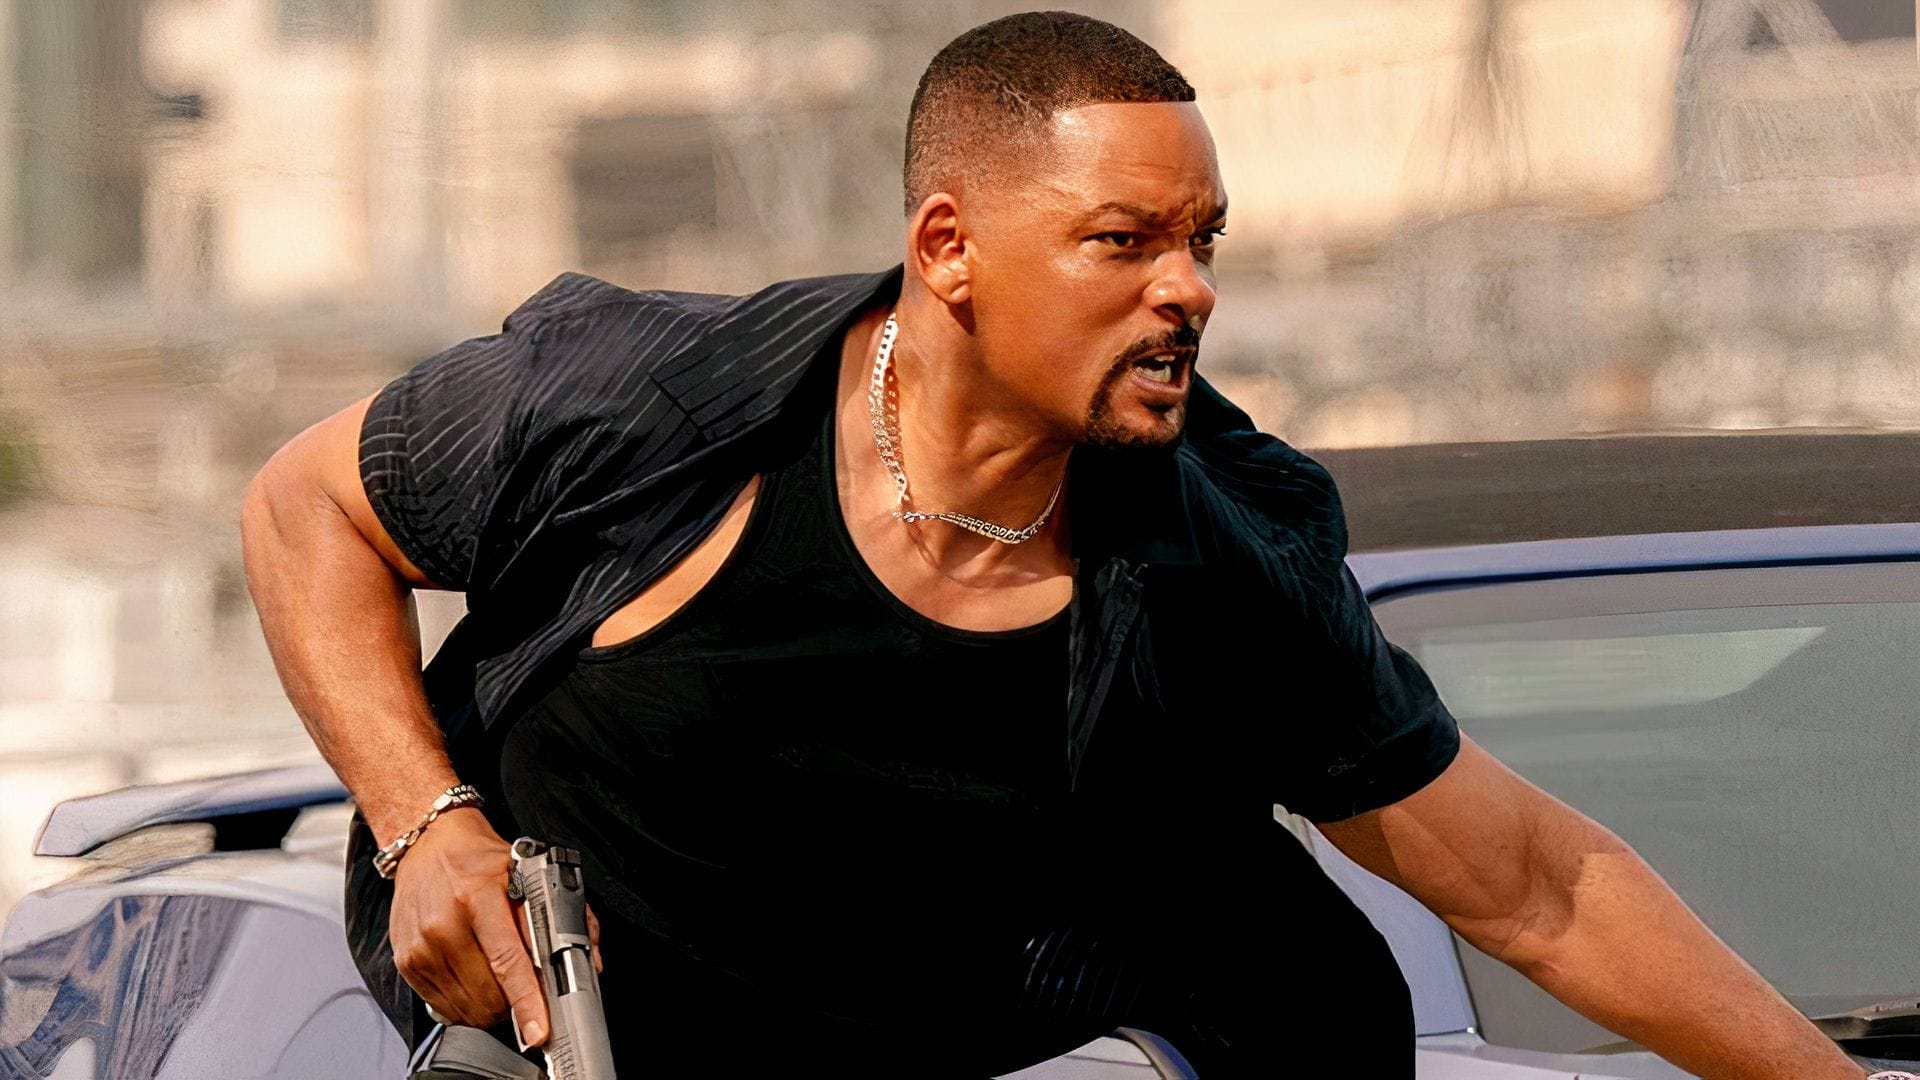 Bad Boys: Ride or Die Arrives in China with Will Smith and Martin Lawrence